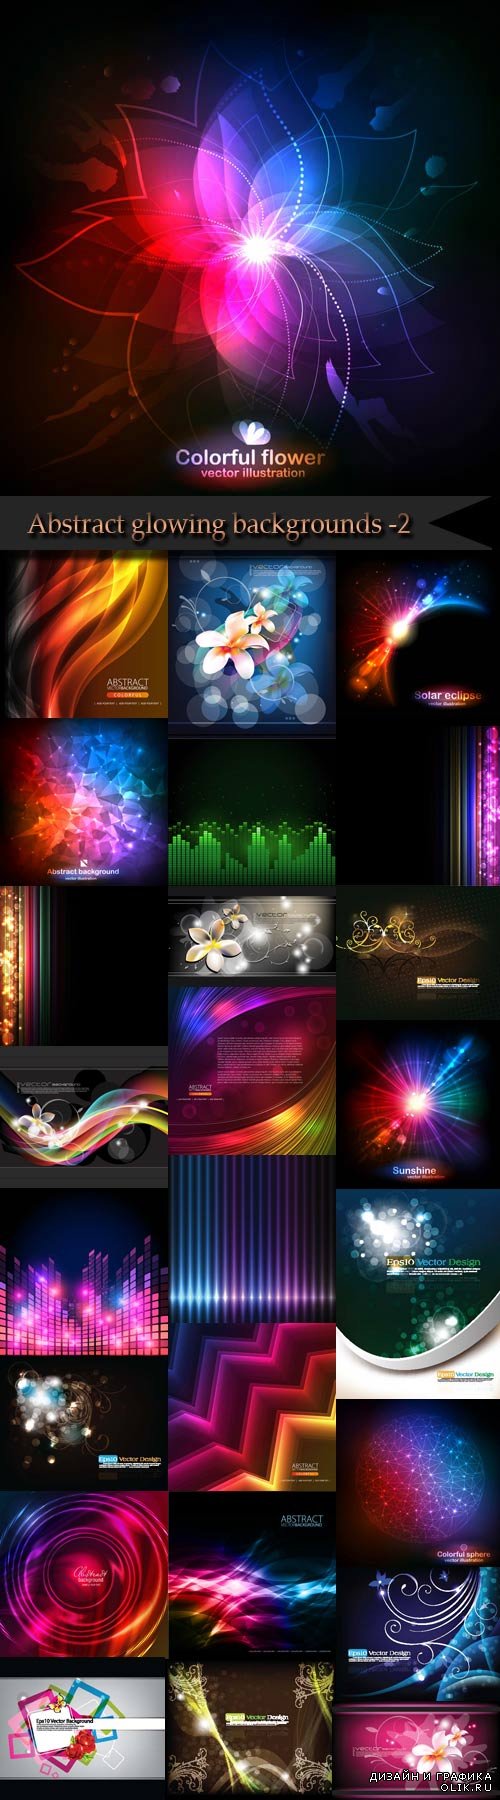 Abstract glowing backgrounds -2